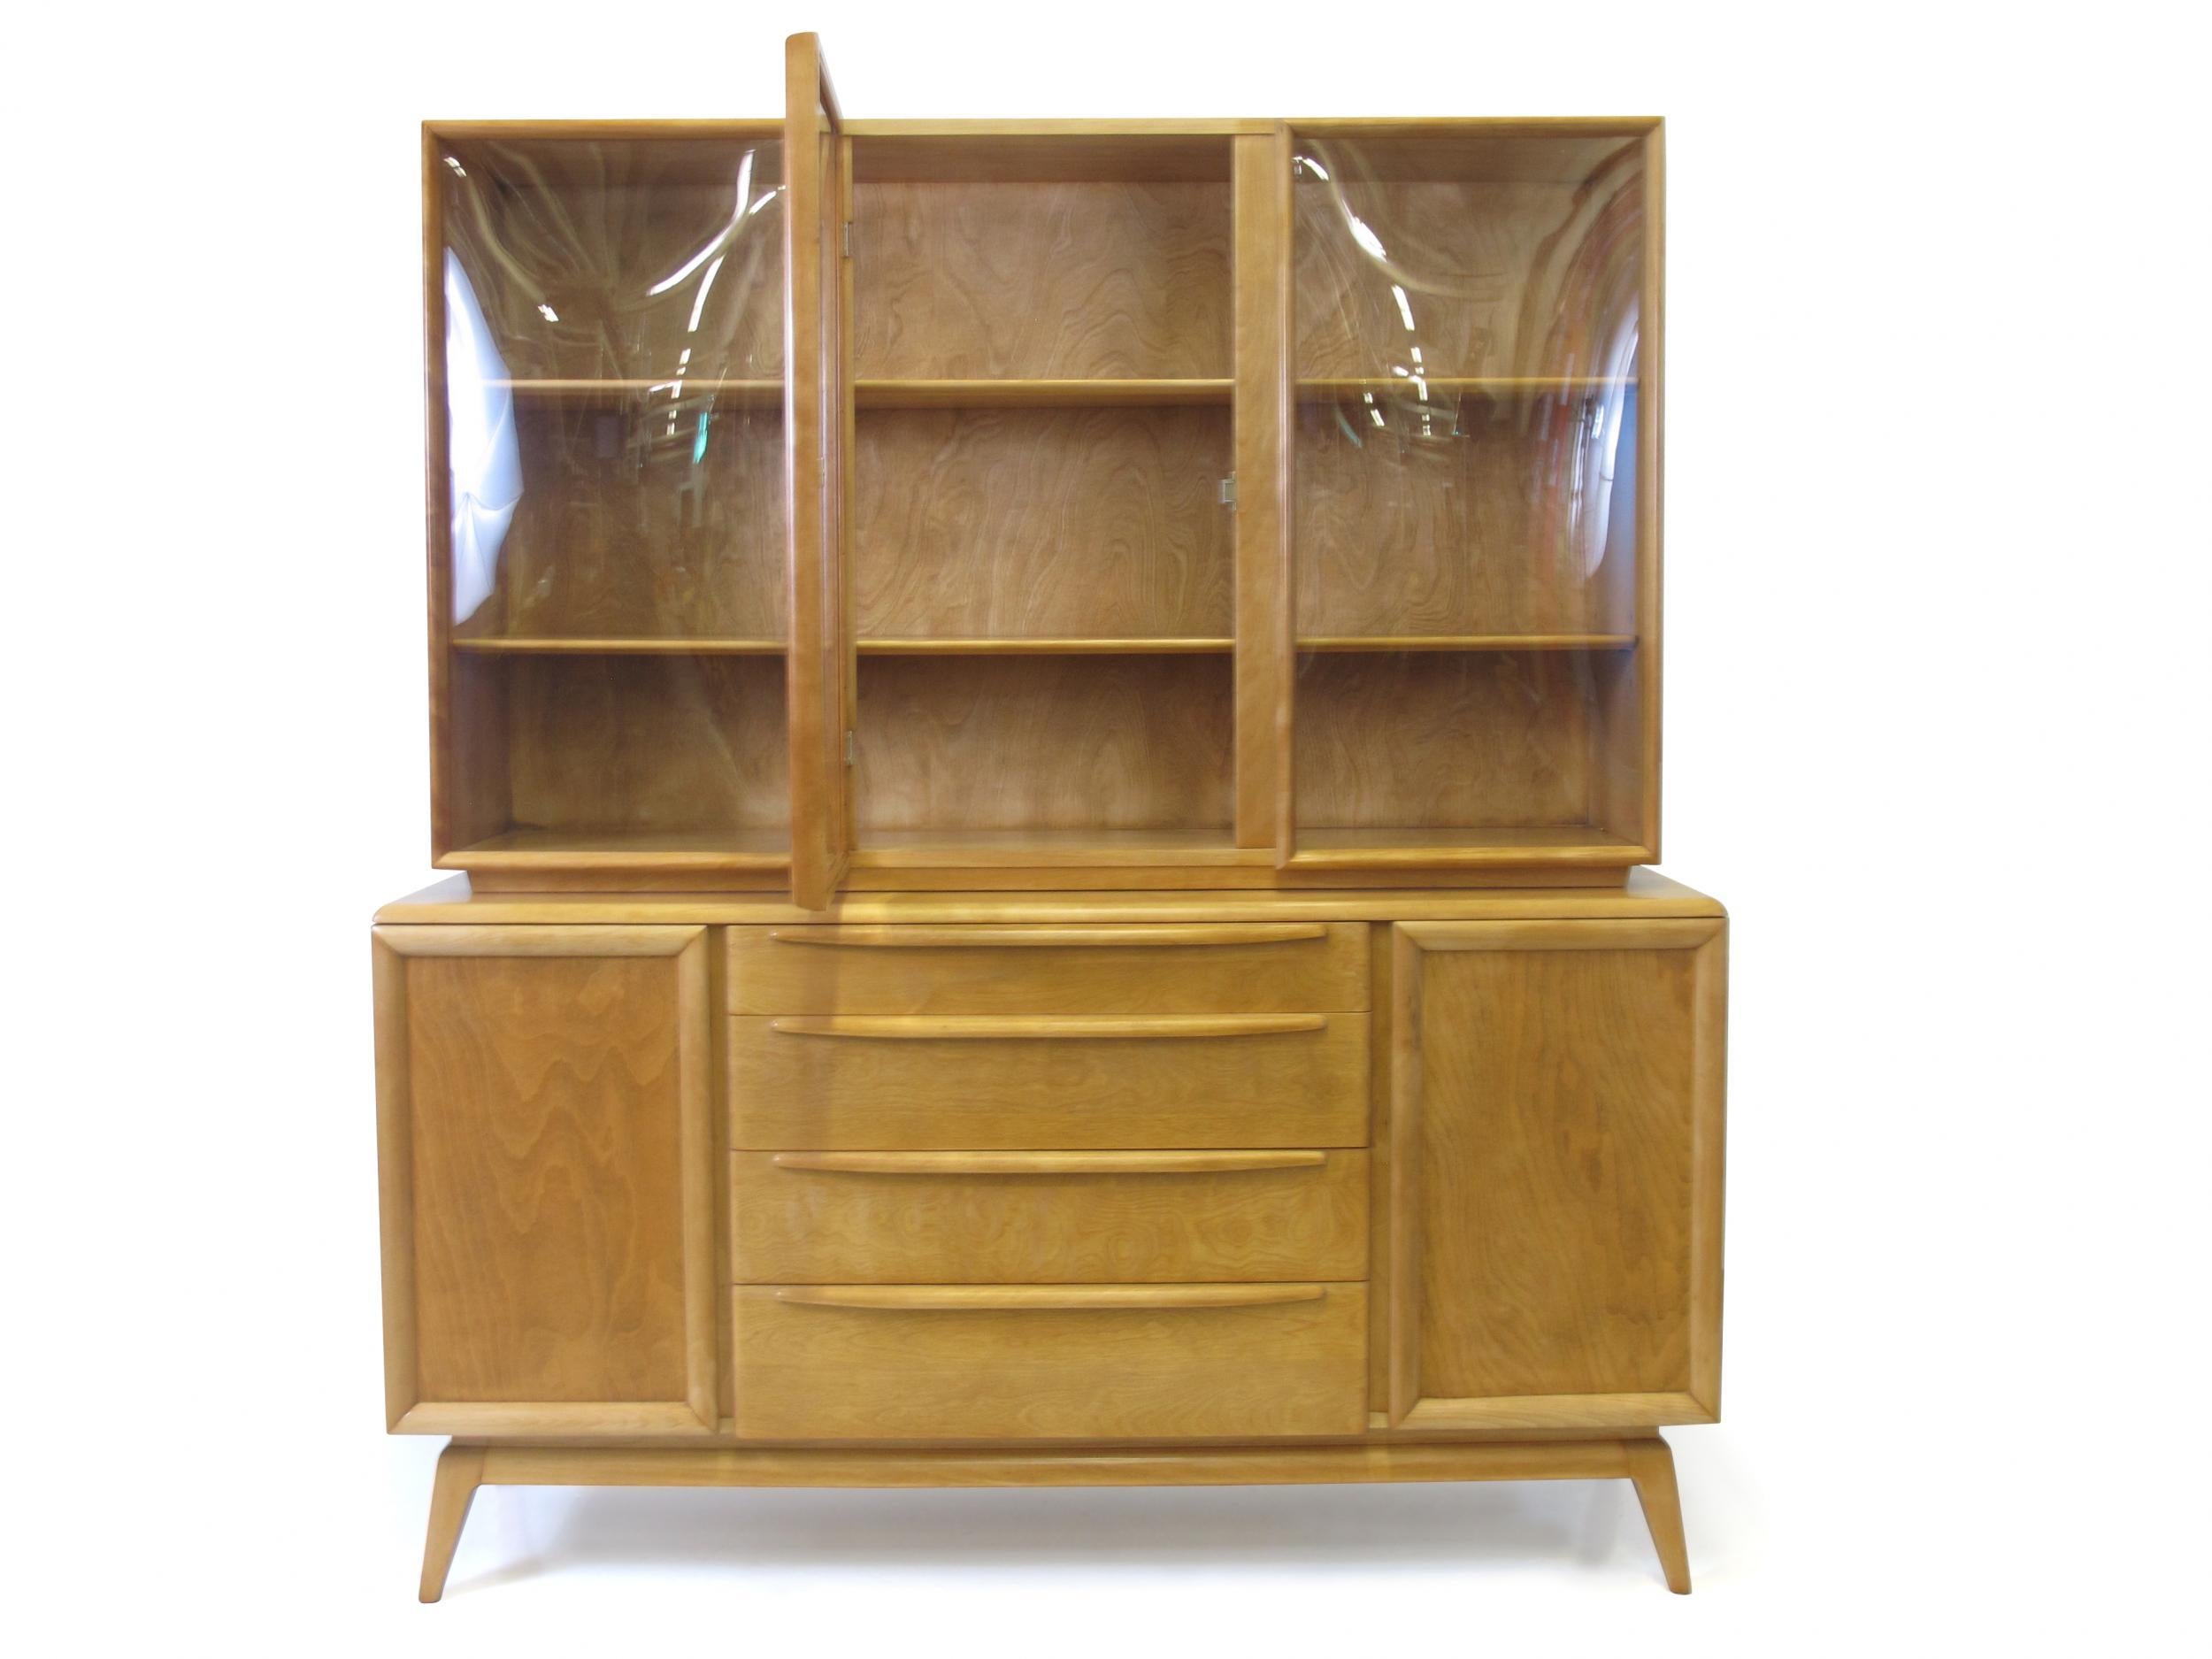 Midcentury sideboard manufactured by Heywood Wakefield. Cabinet crafted of solid birch with pair of doors and series of four drawers in center, with convex glass hutch above with three doors and two adjustable shelves. Very good condition with minor